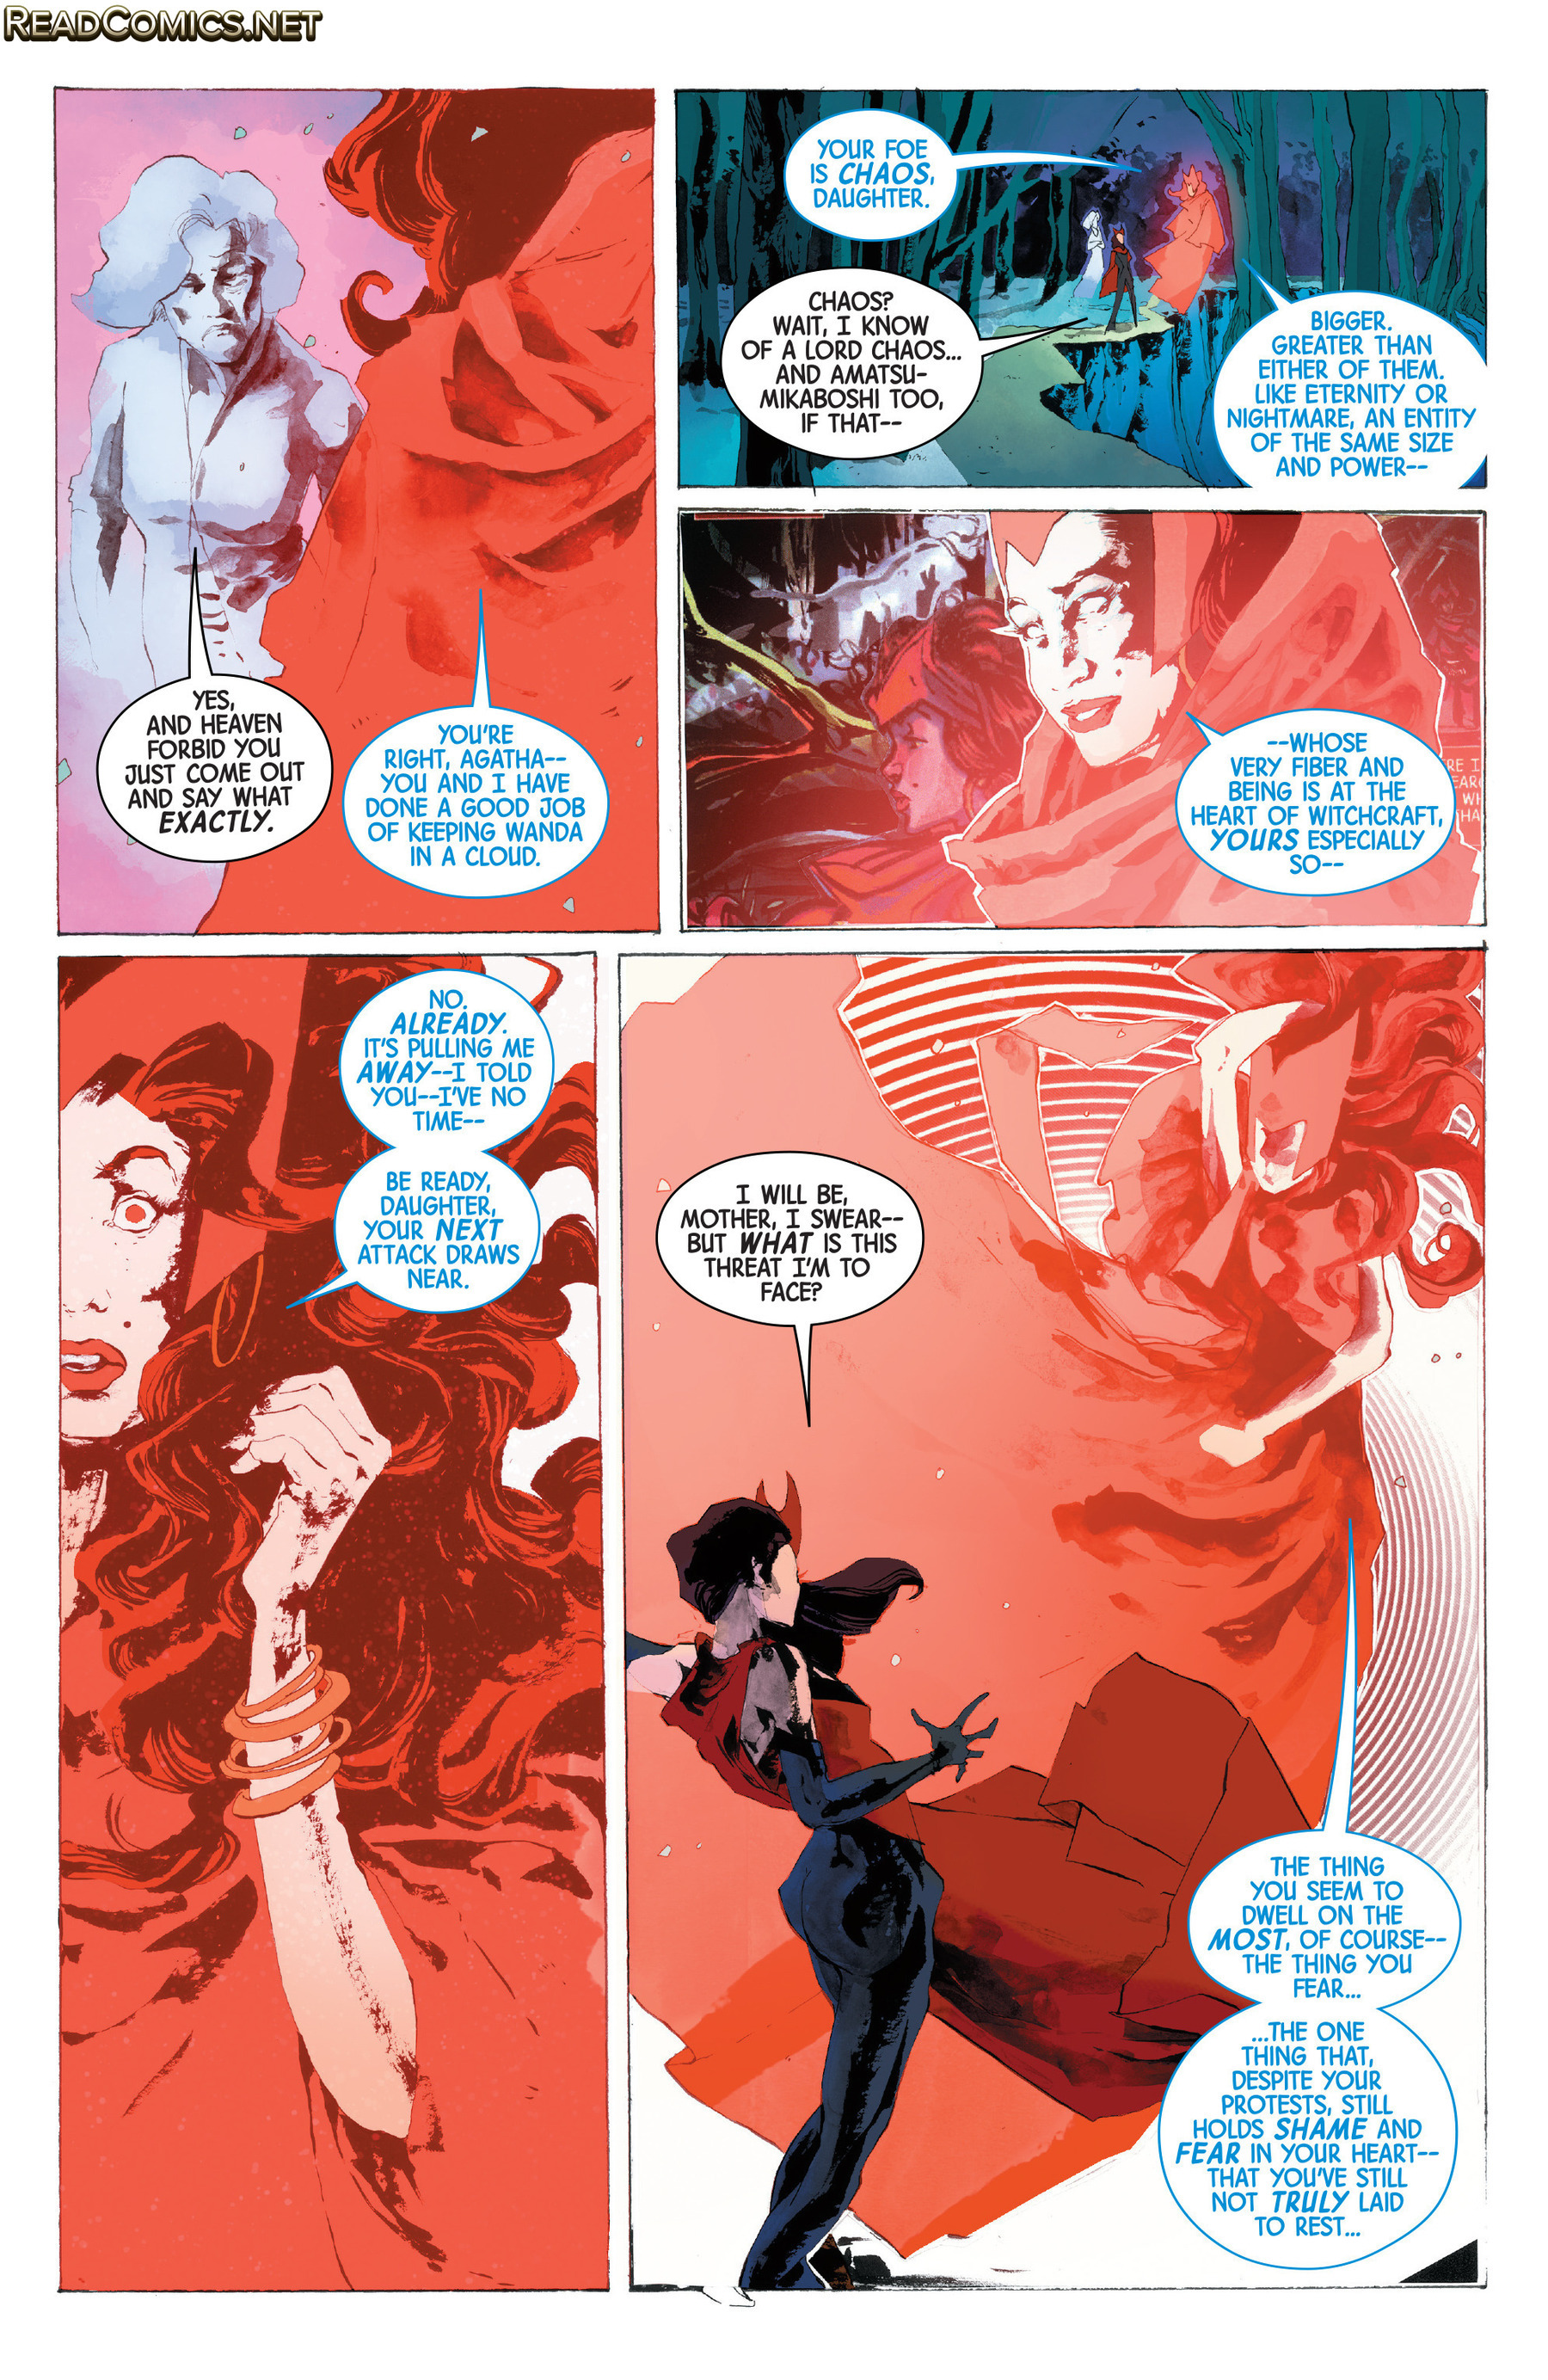 SCARLET WITCH: Page 12 of 12